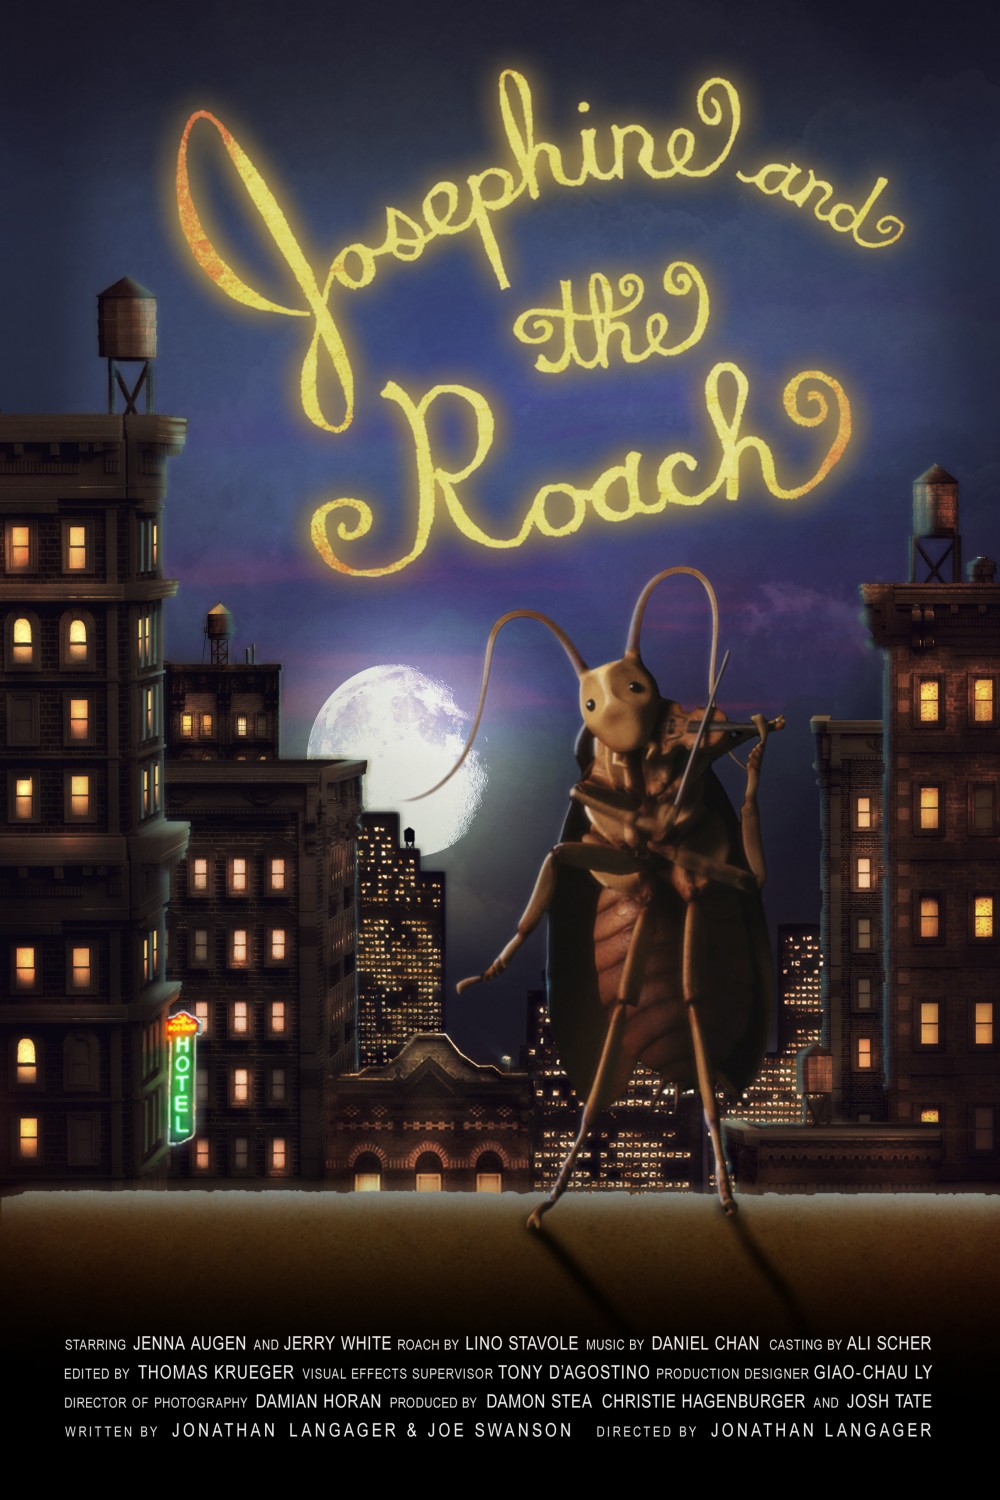 Extra Large Movie Poster Image for Josephine and the Roach